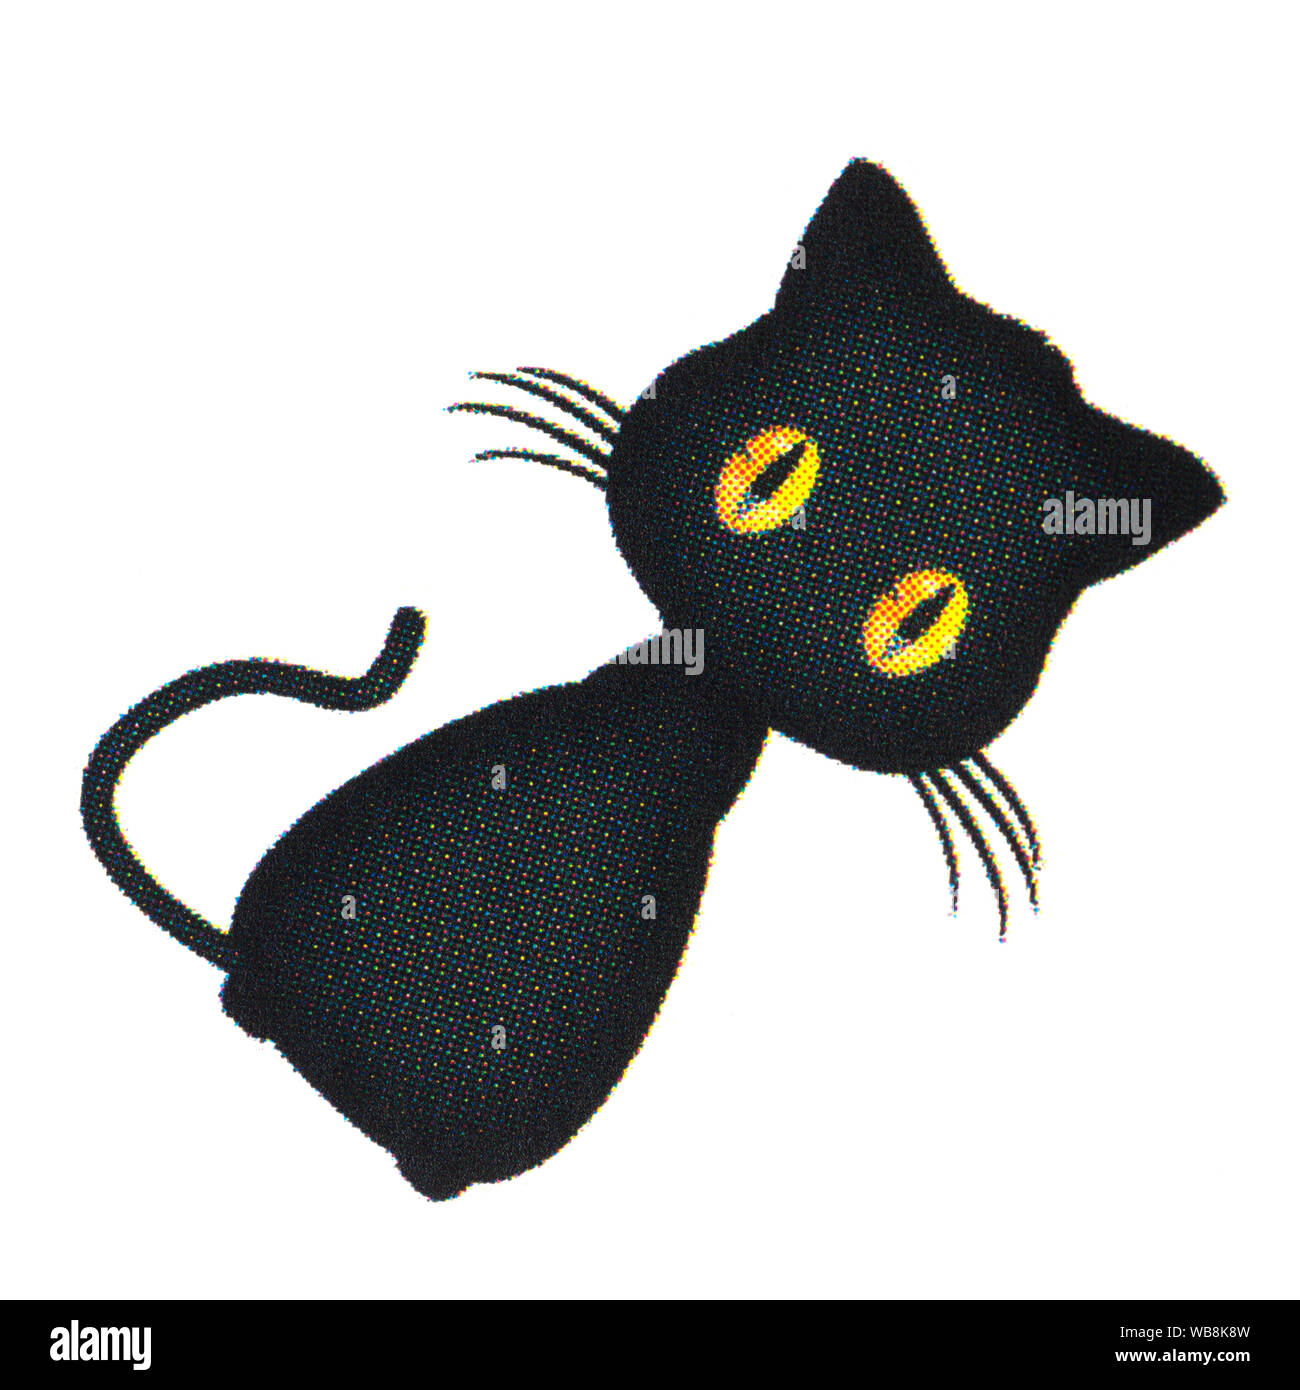 Angry Cat Emoticon Emoji Smiley Vector Illustration Stock Illustration -  Download Image Now - iStock